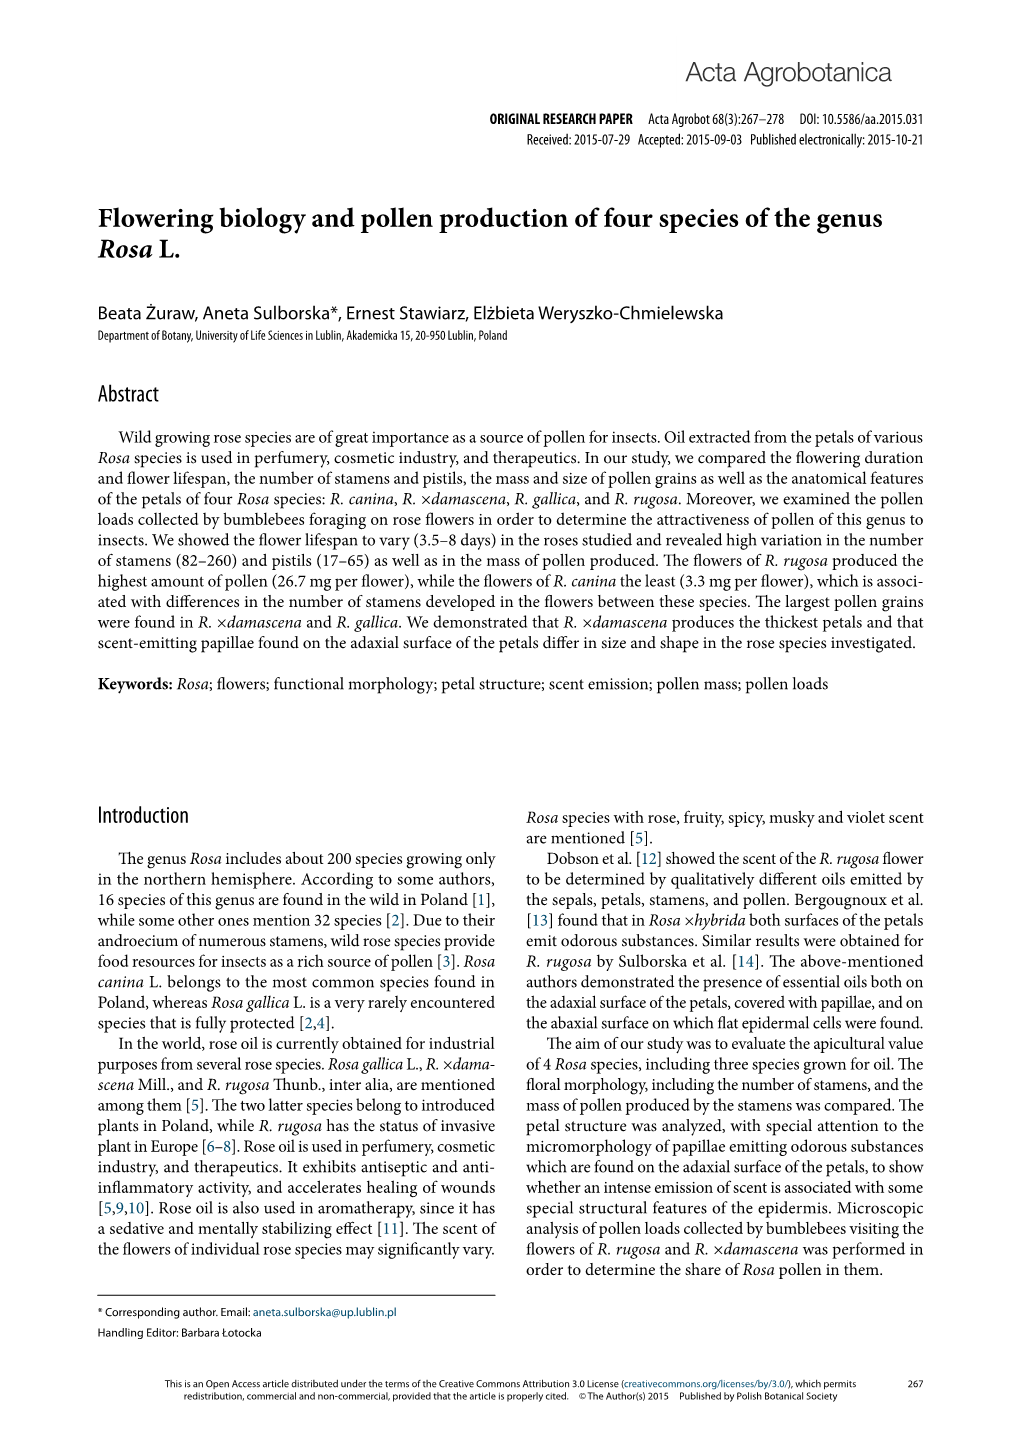 Flowering Biology and Pollen Production of Four Species of the Genus Rosa L